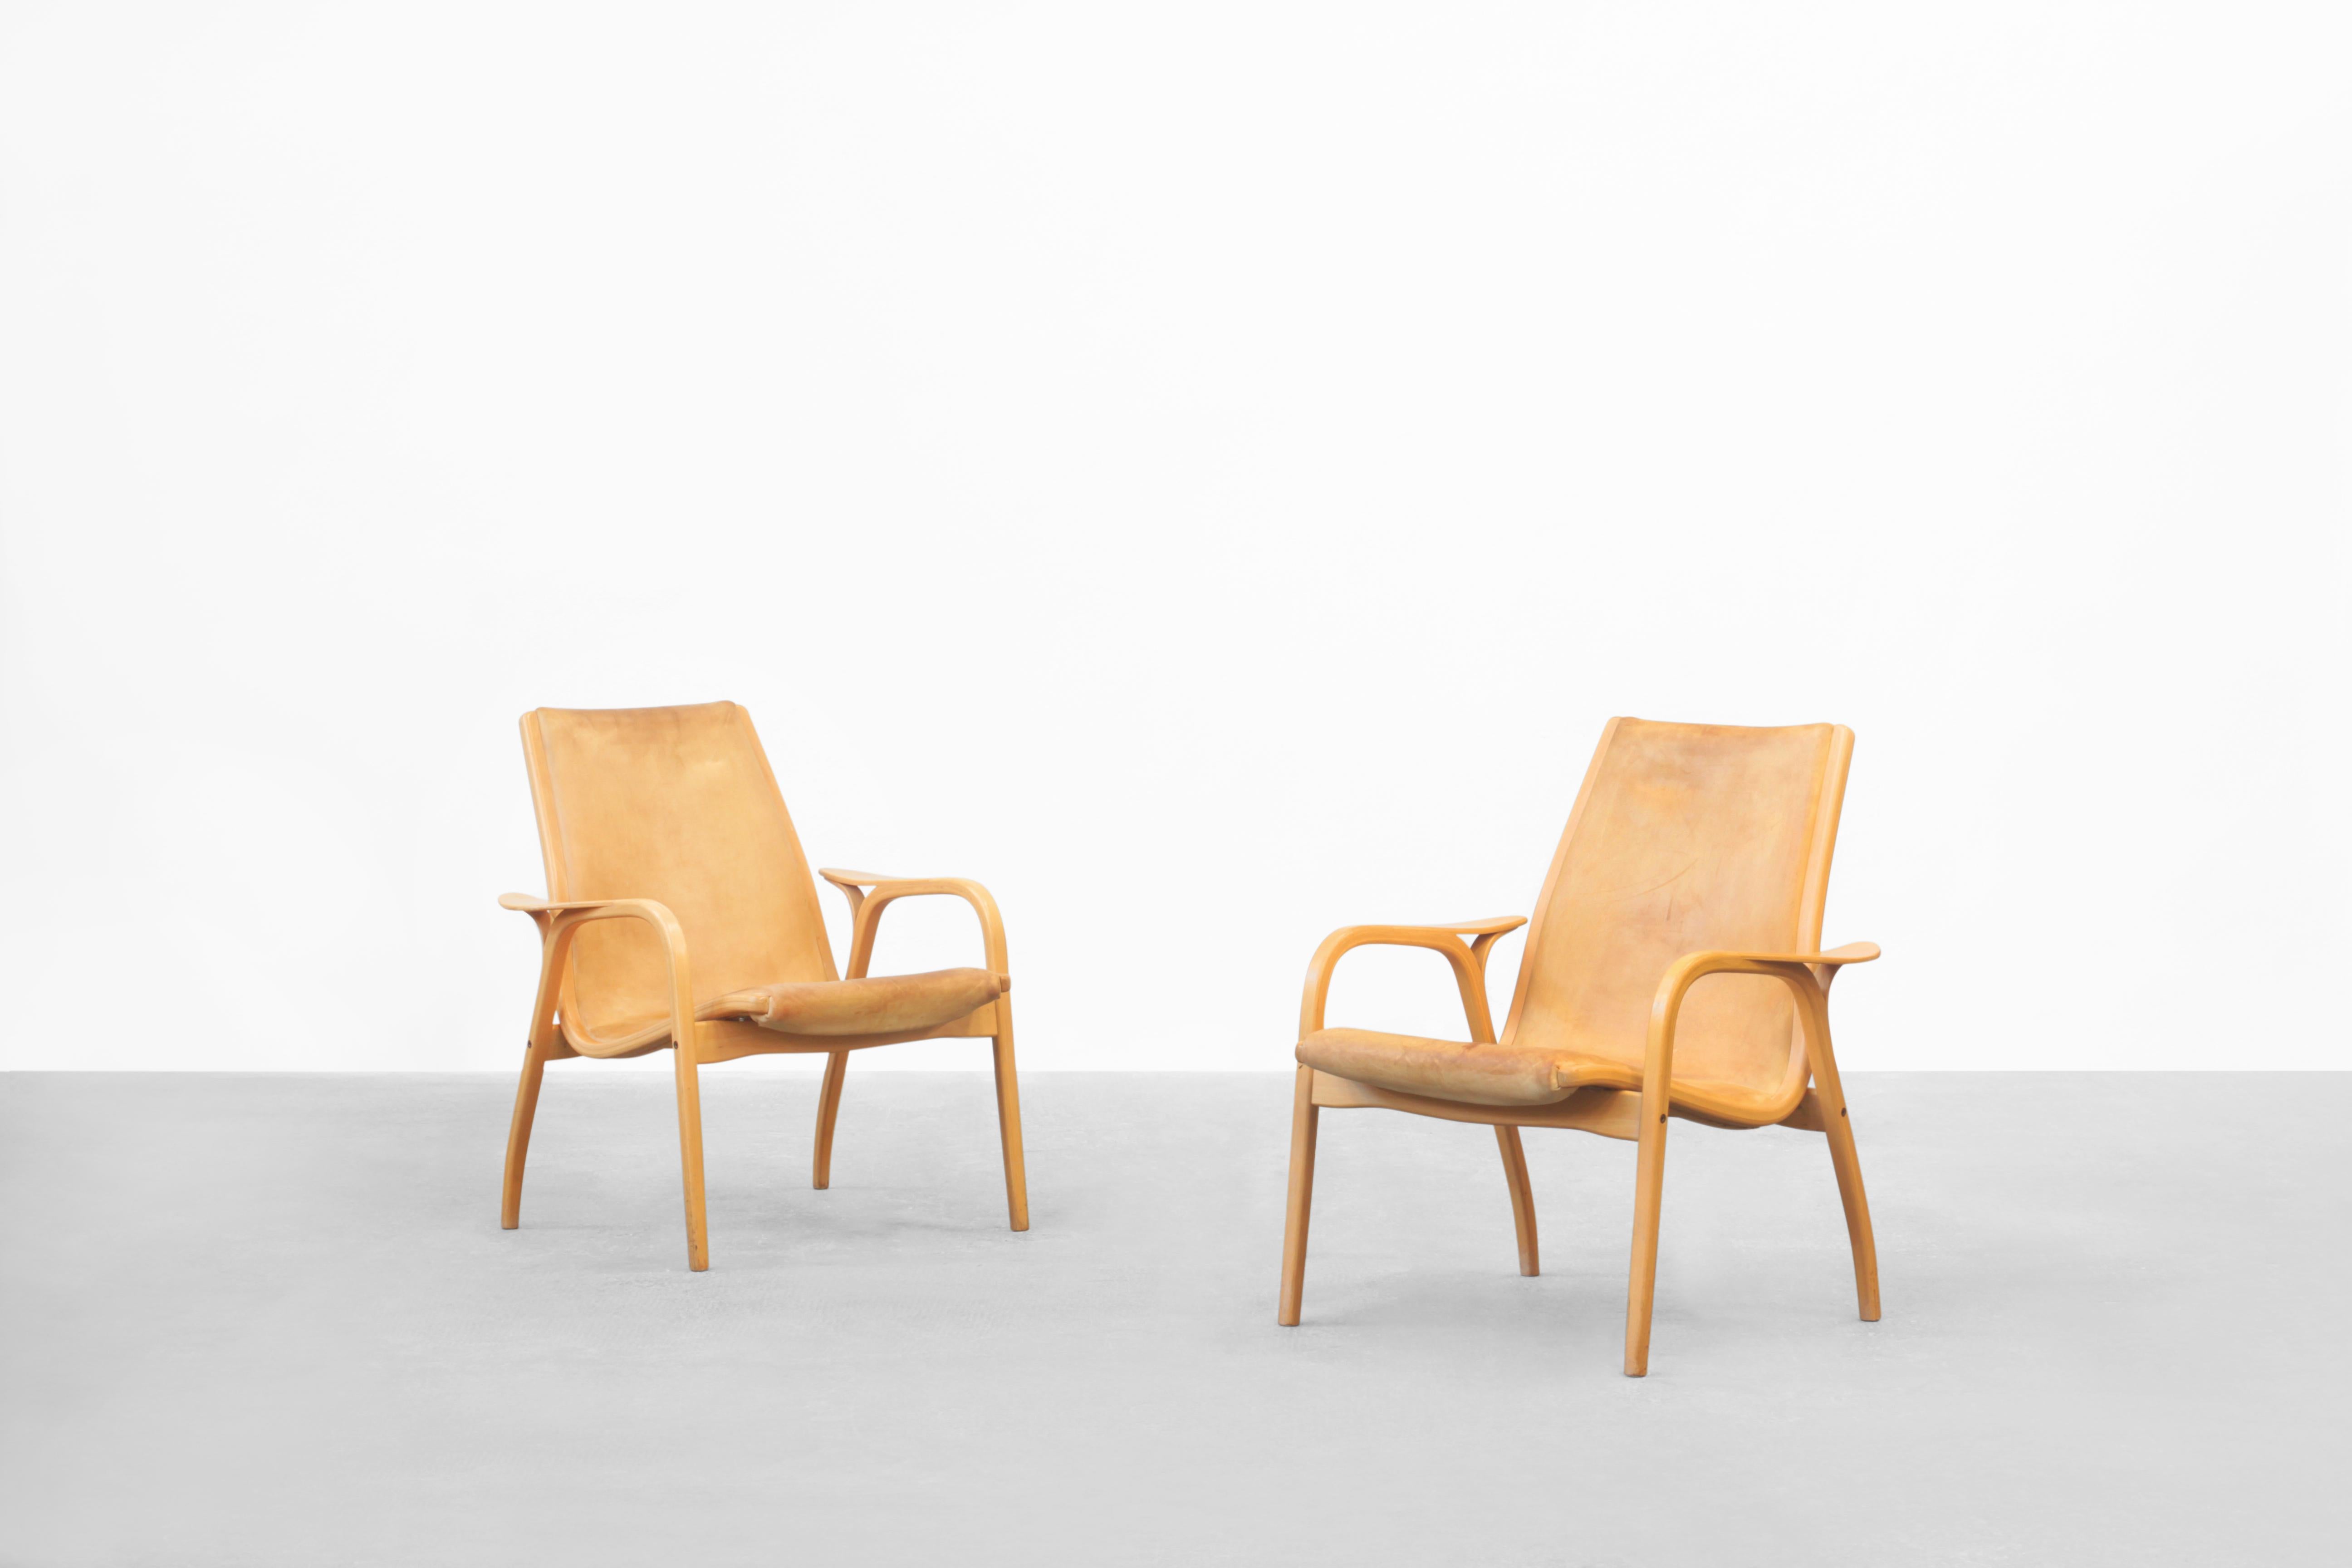 Beautiful pair of lounge chairs, designed by Yngve Ekstrøm and produced by Swedese in the 1950ies.
Both chairs are in great original condition with patinated leather and traces of usage. The chairs come with a beechwood frame and cognac brown